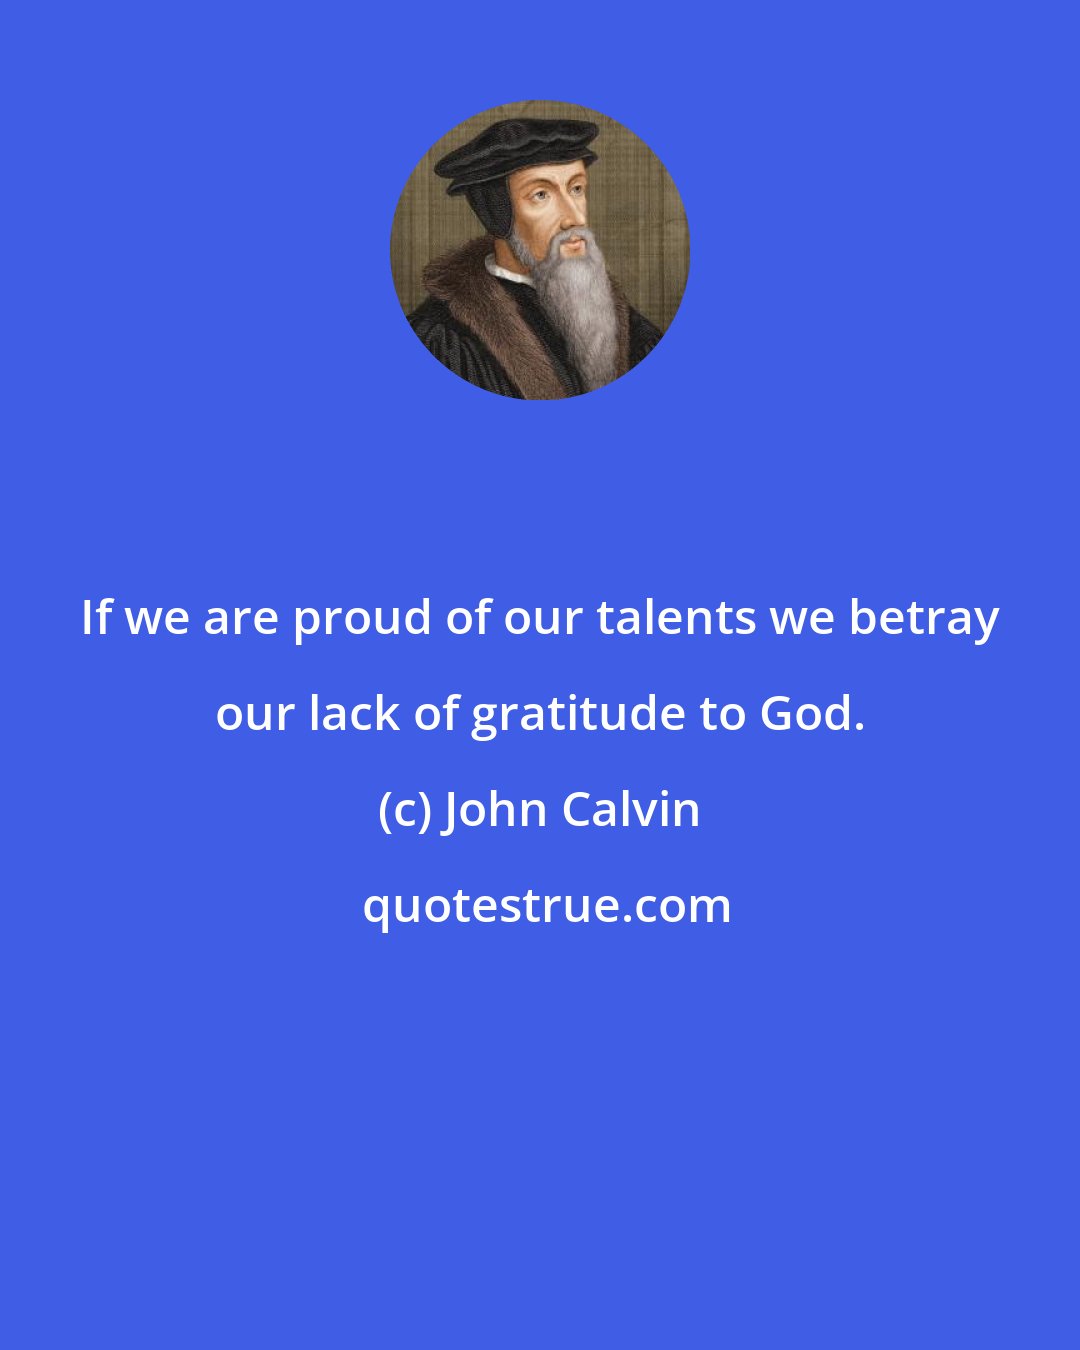 John Calvin: If we are proud of our talents we betray our lack of gratitude to God.